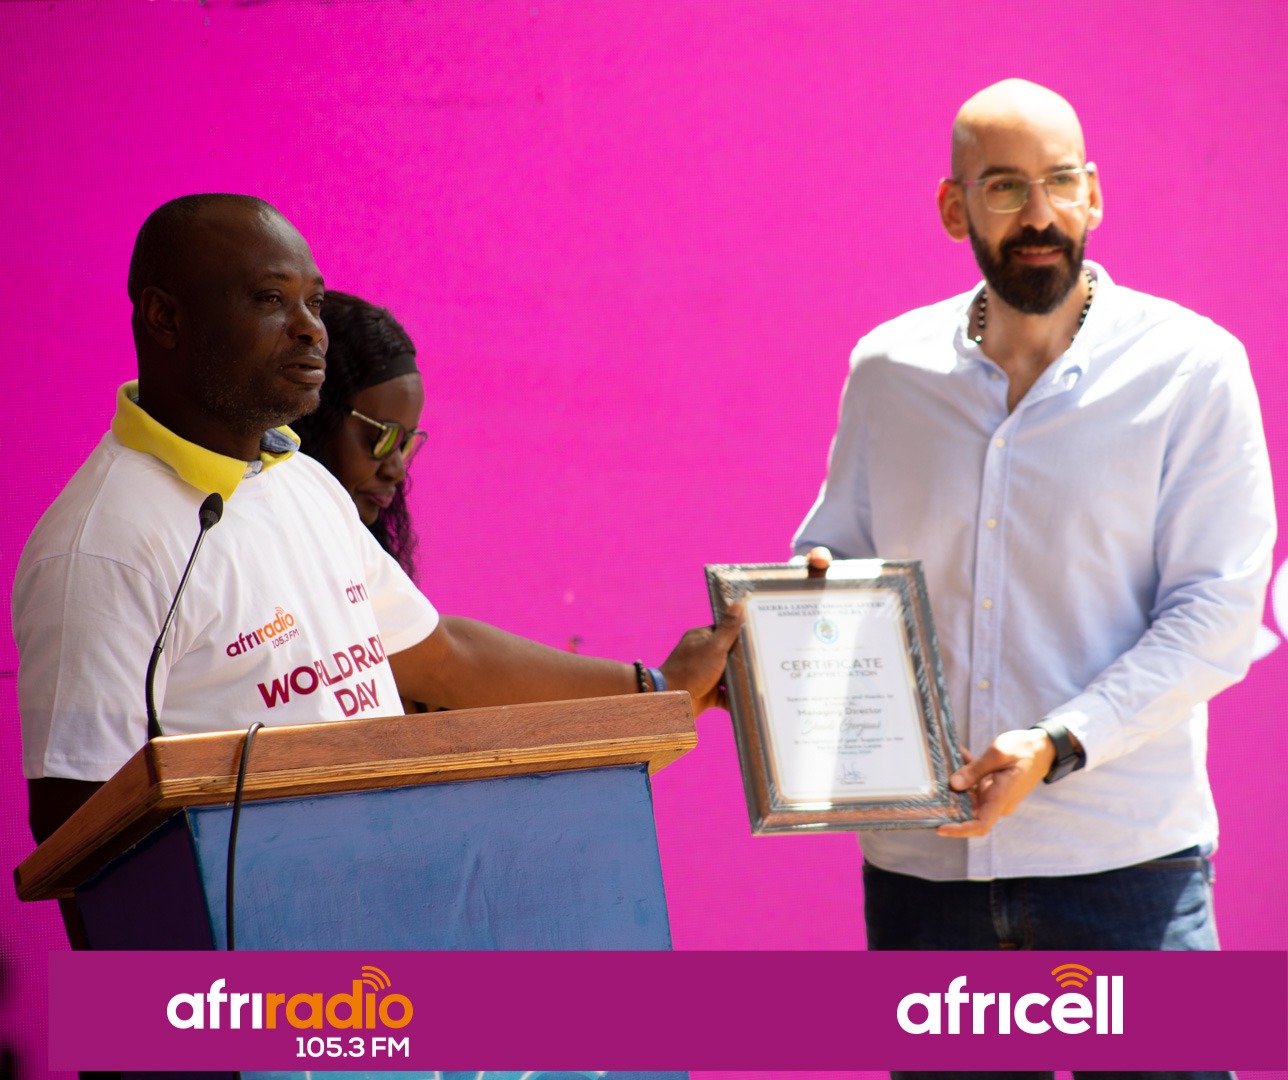 Sierra Leone joins the world to commemorate World Radio Day